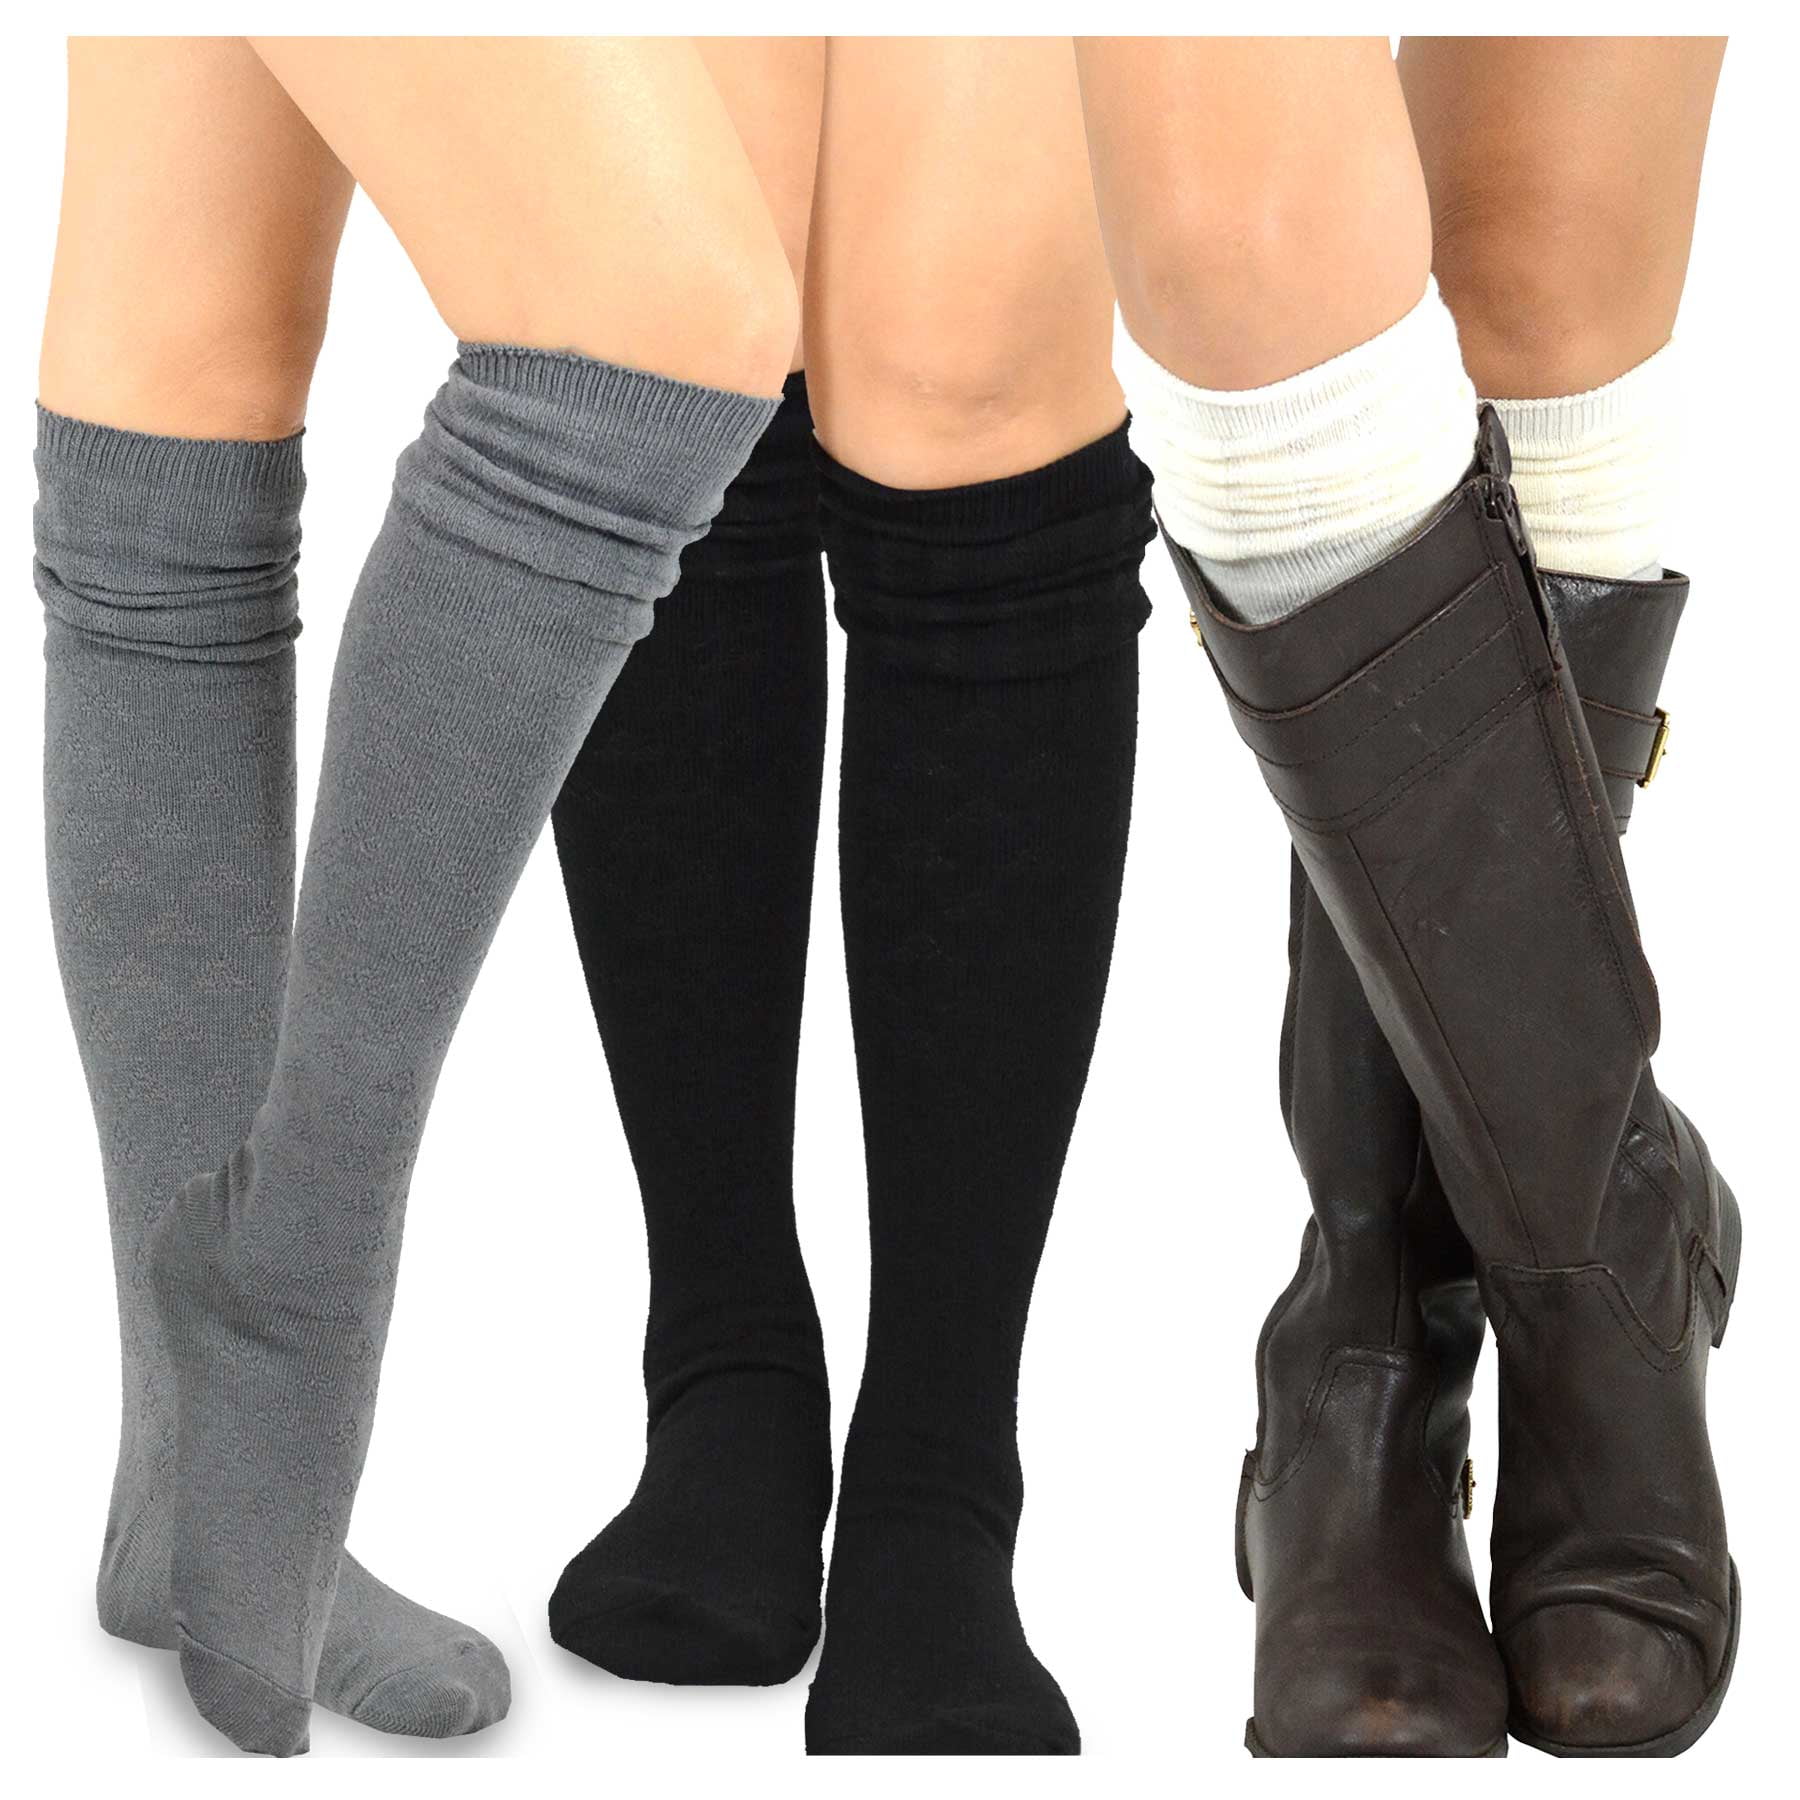 Teehee Women's Fashion Cotton Over The Knee Socks 3 Pairs Pack 